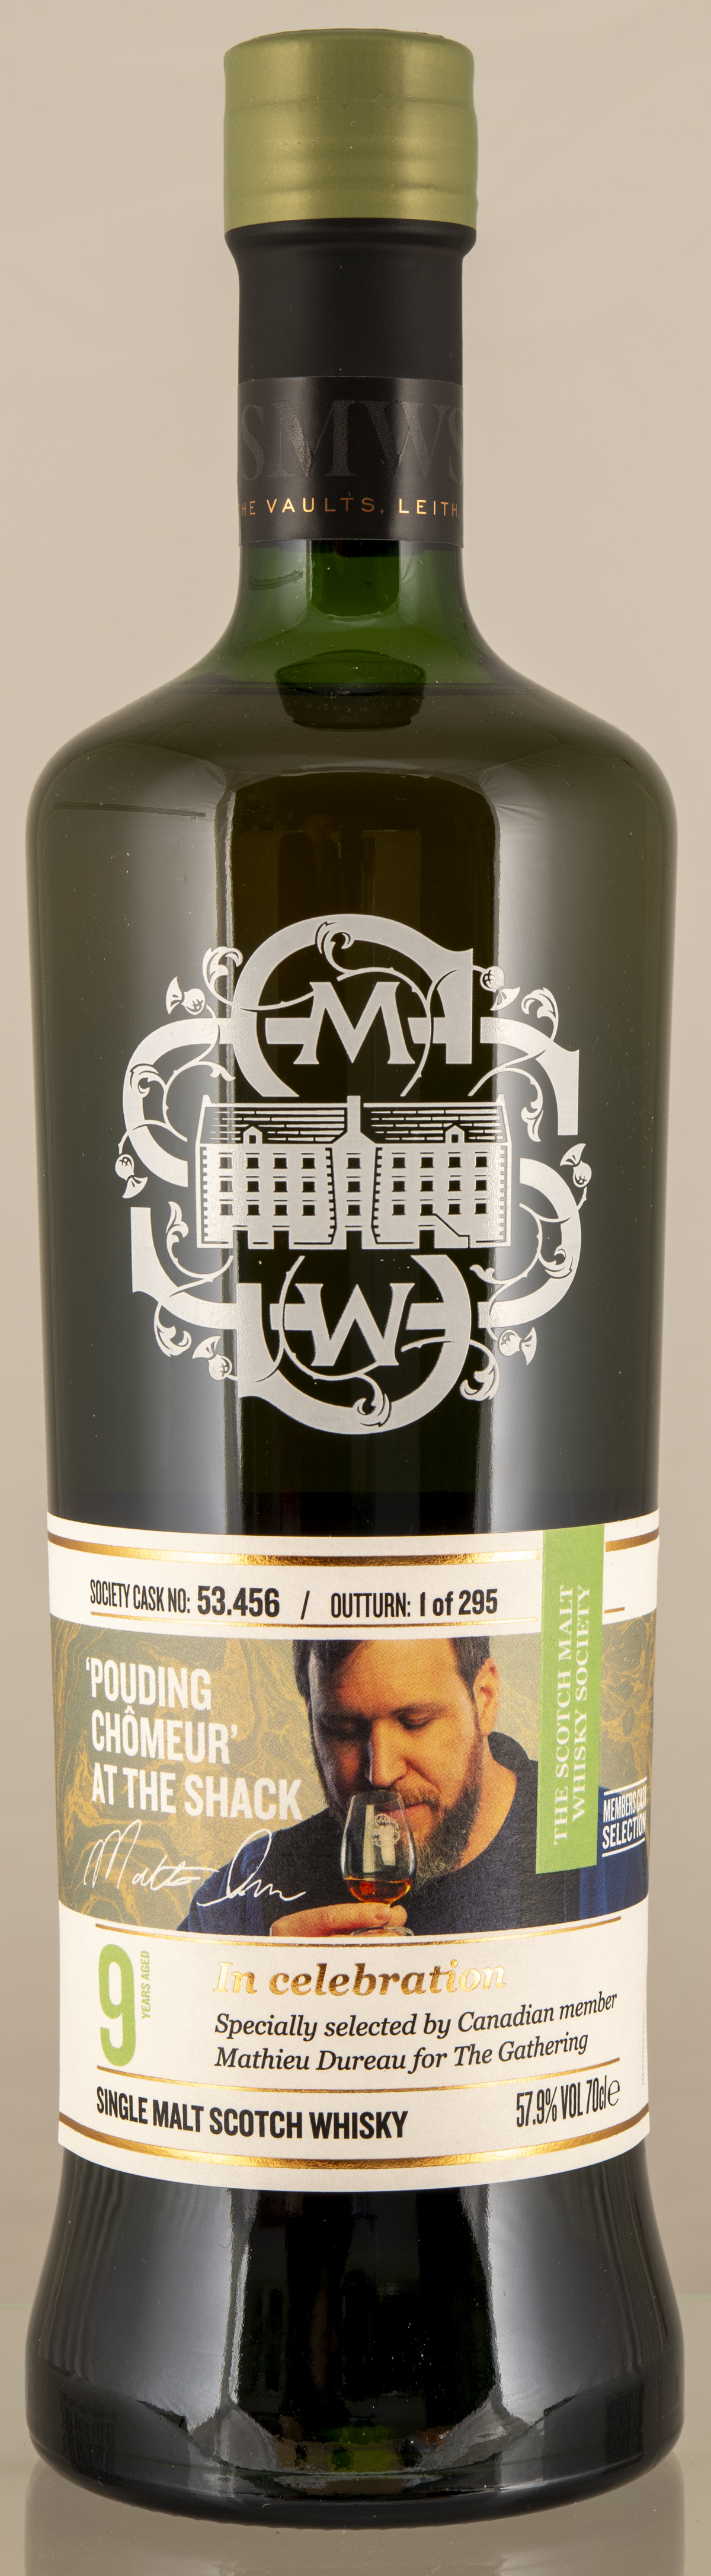 Billede: D85_8356 - SMWS 53.456 Pouding Chomeur at the Schack - bottle front.jpg